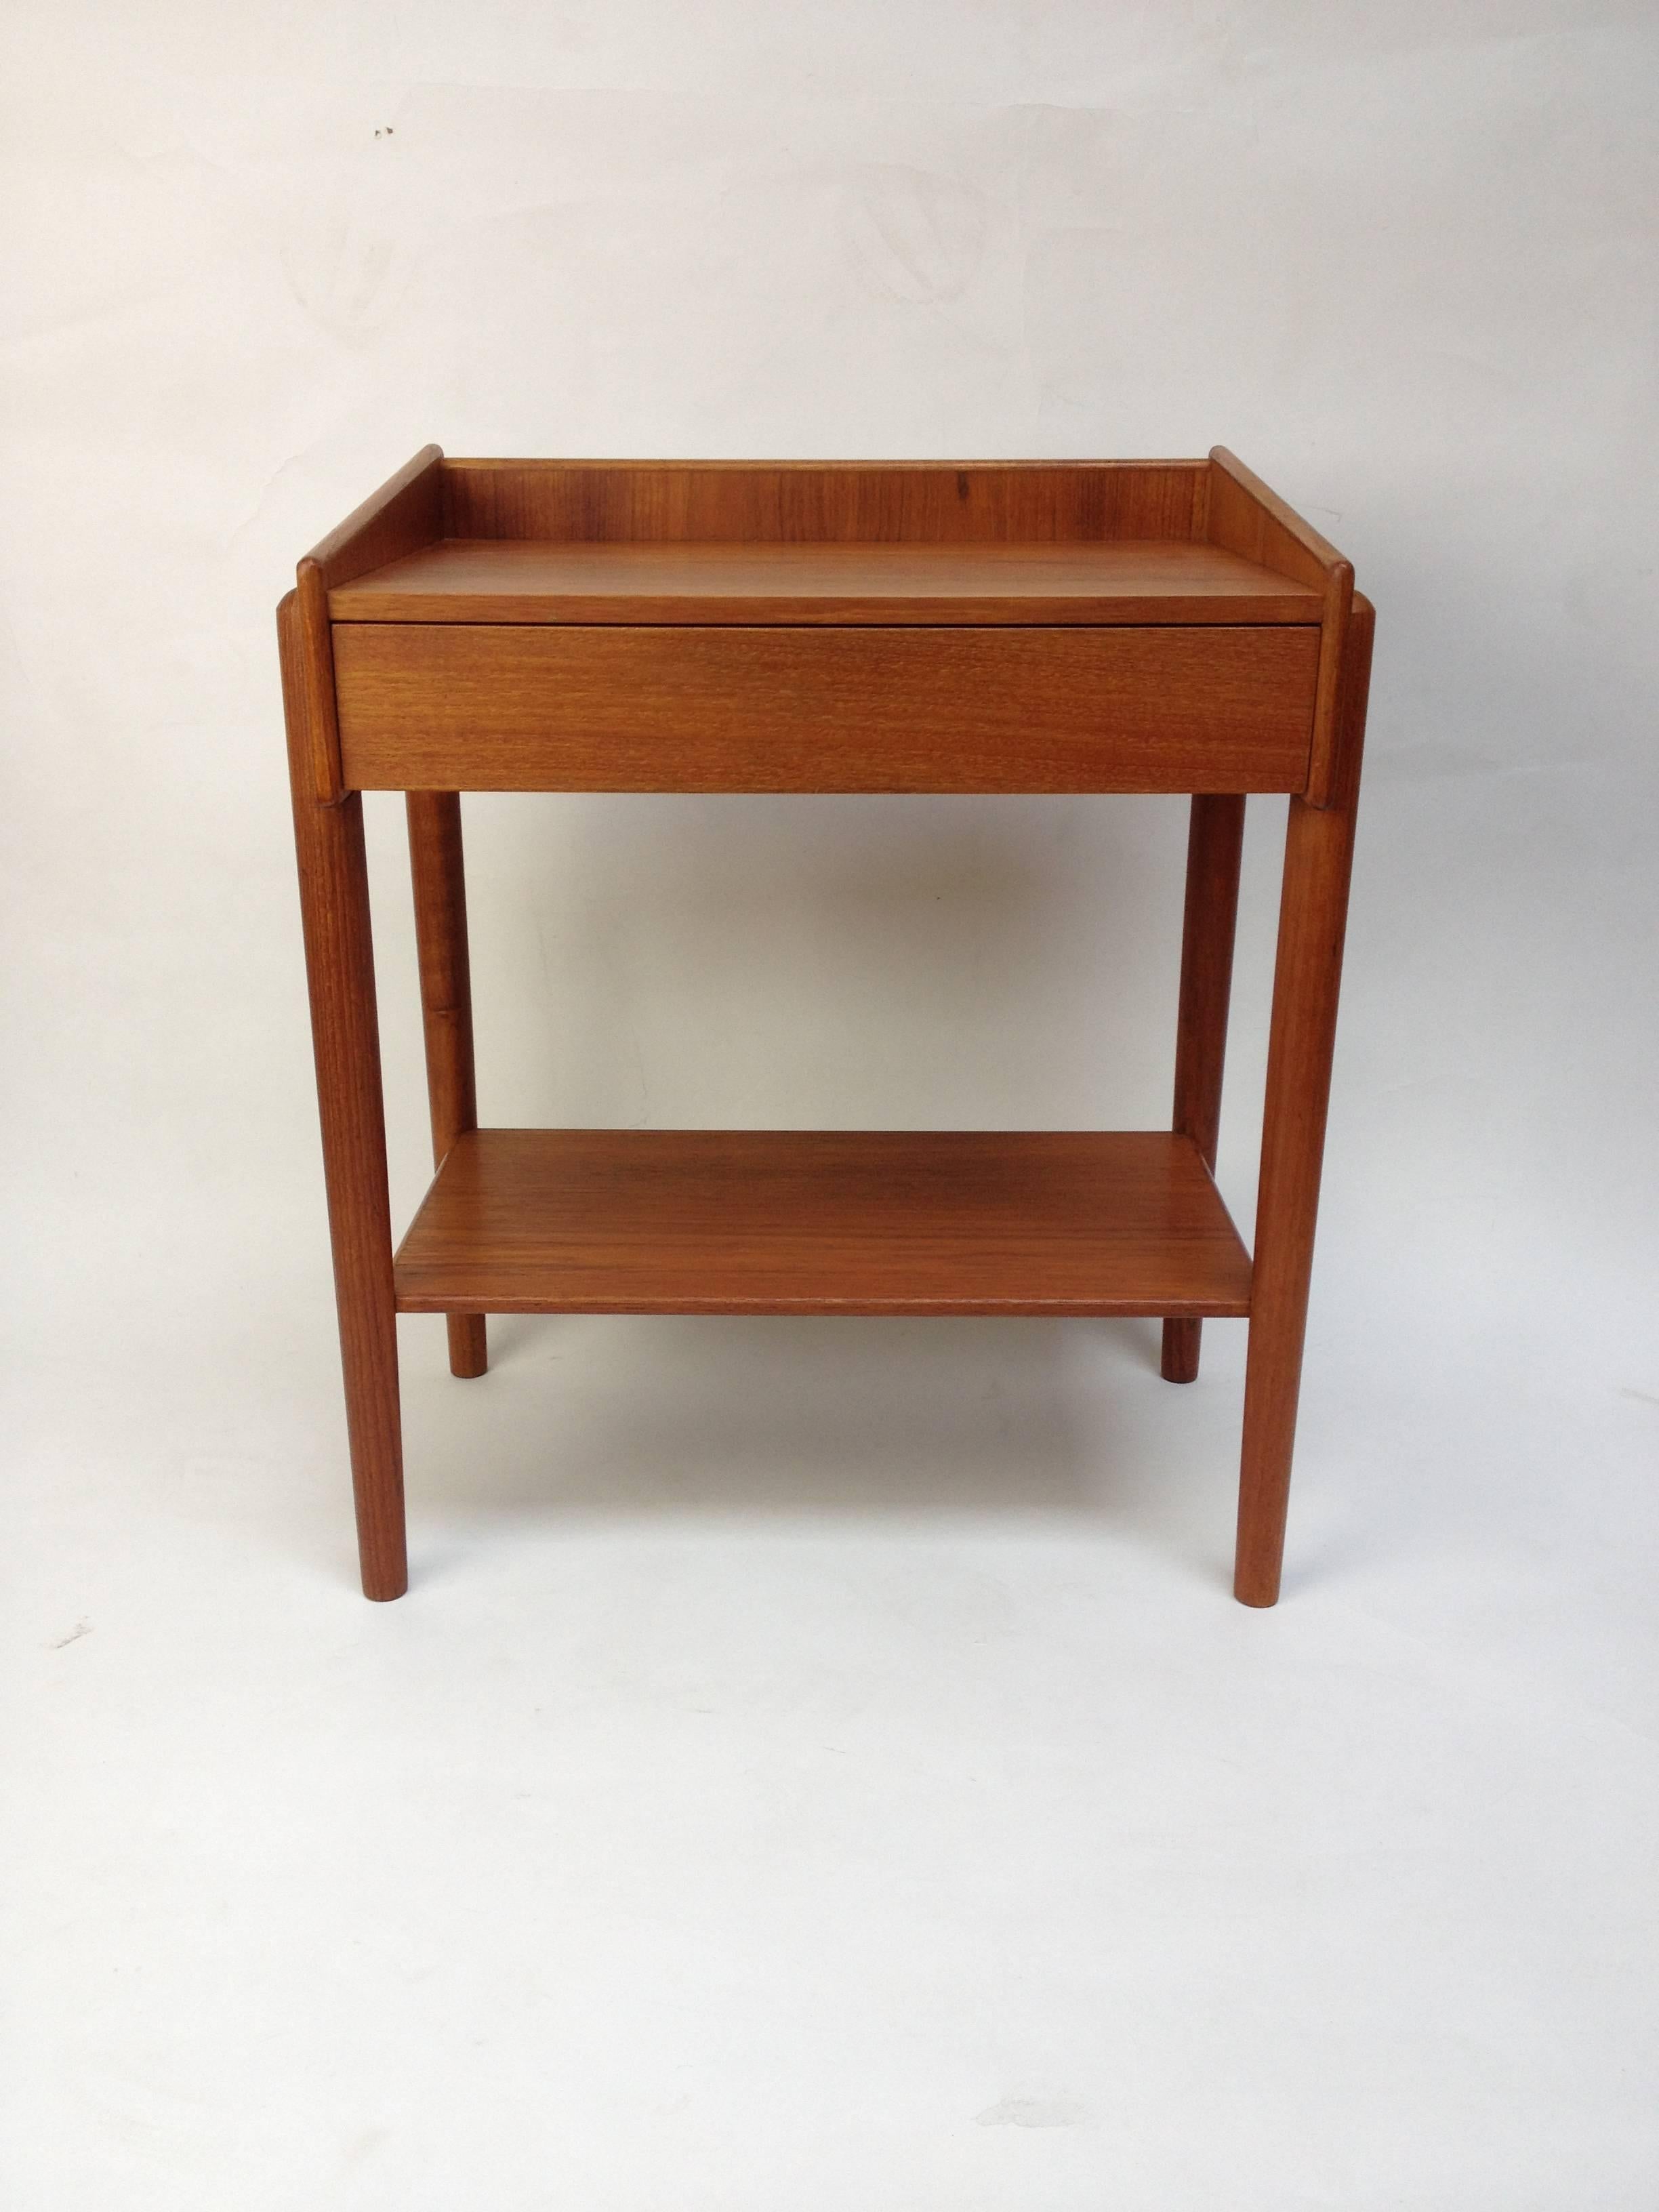 Sleek and incredibly well made bedside or nightstand with one single drawer designed by Børge Mogensen for Soborg - Made in Denmark - lovely dovetailed drawer - spectacular design - excellent vintage condition.